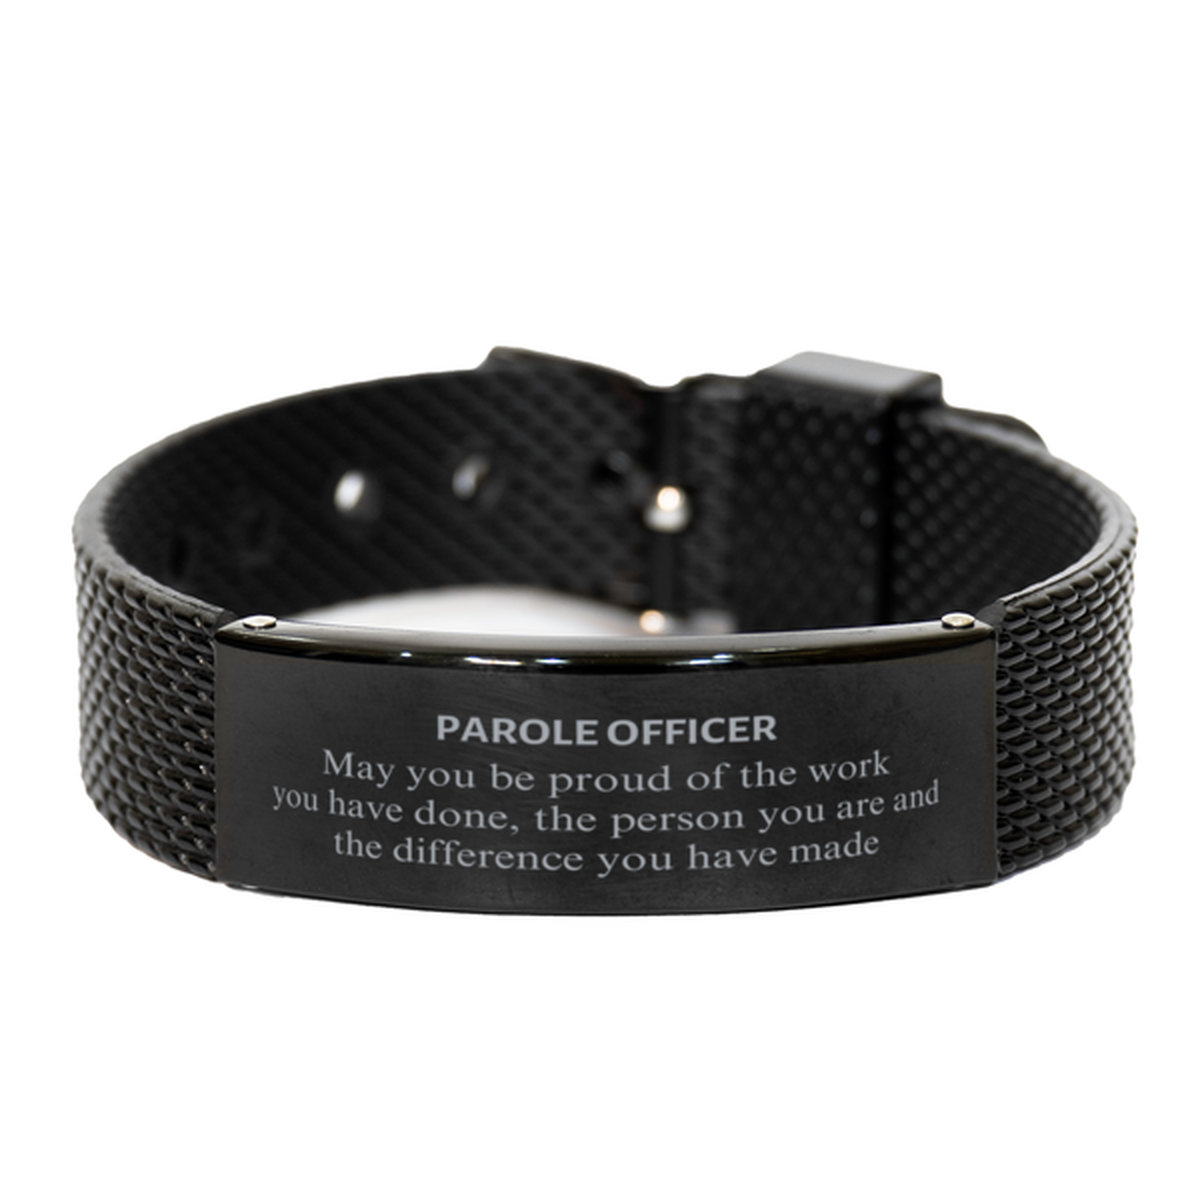 Parole Officer May you be proud of the work you have done, Retirement Parole Officer Black Shark Mesh Bracelet for Colleague Appreciation Gifts Amazing for Parole Officer